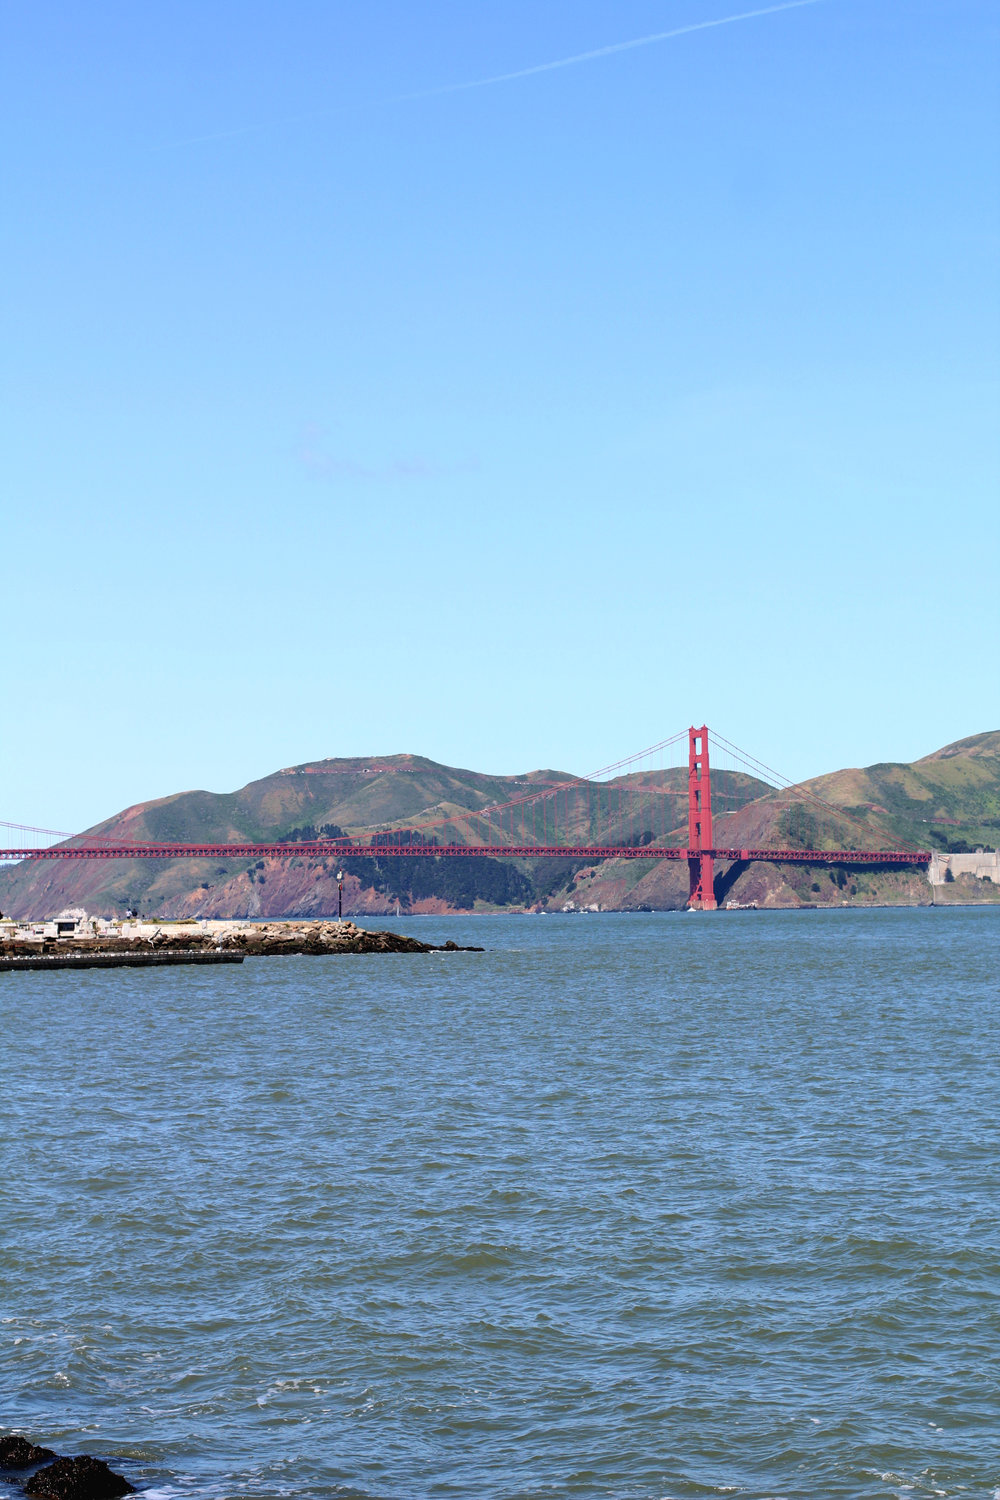 72 Hours in San Francisco